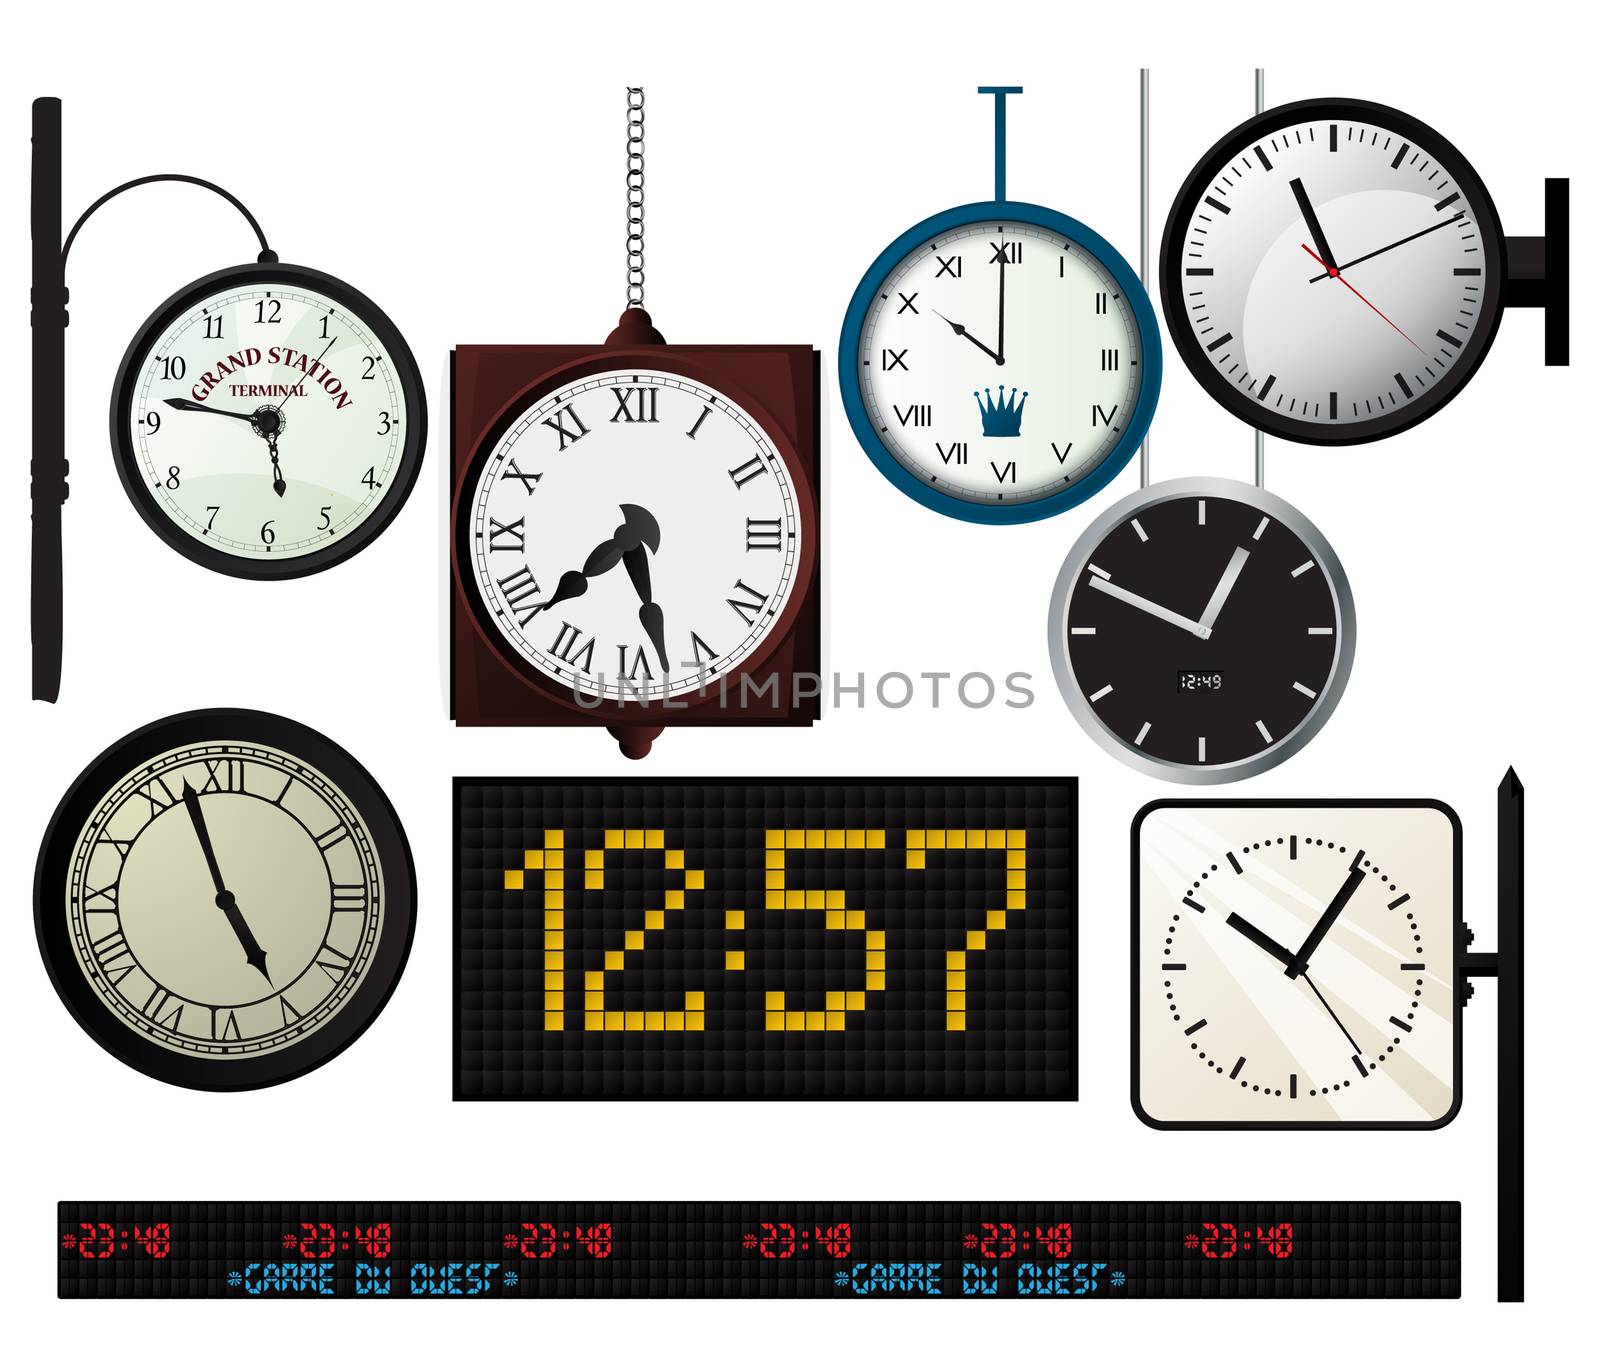 Train, metro station, watches collection over white background